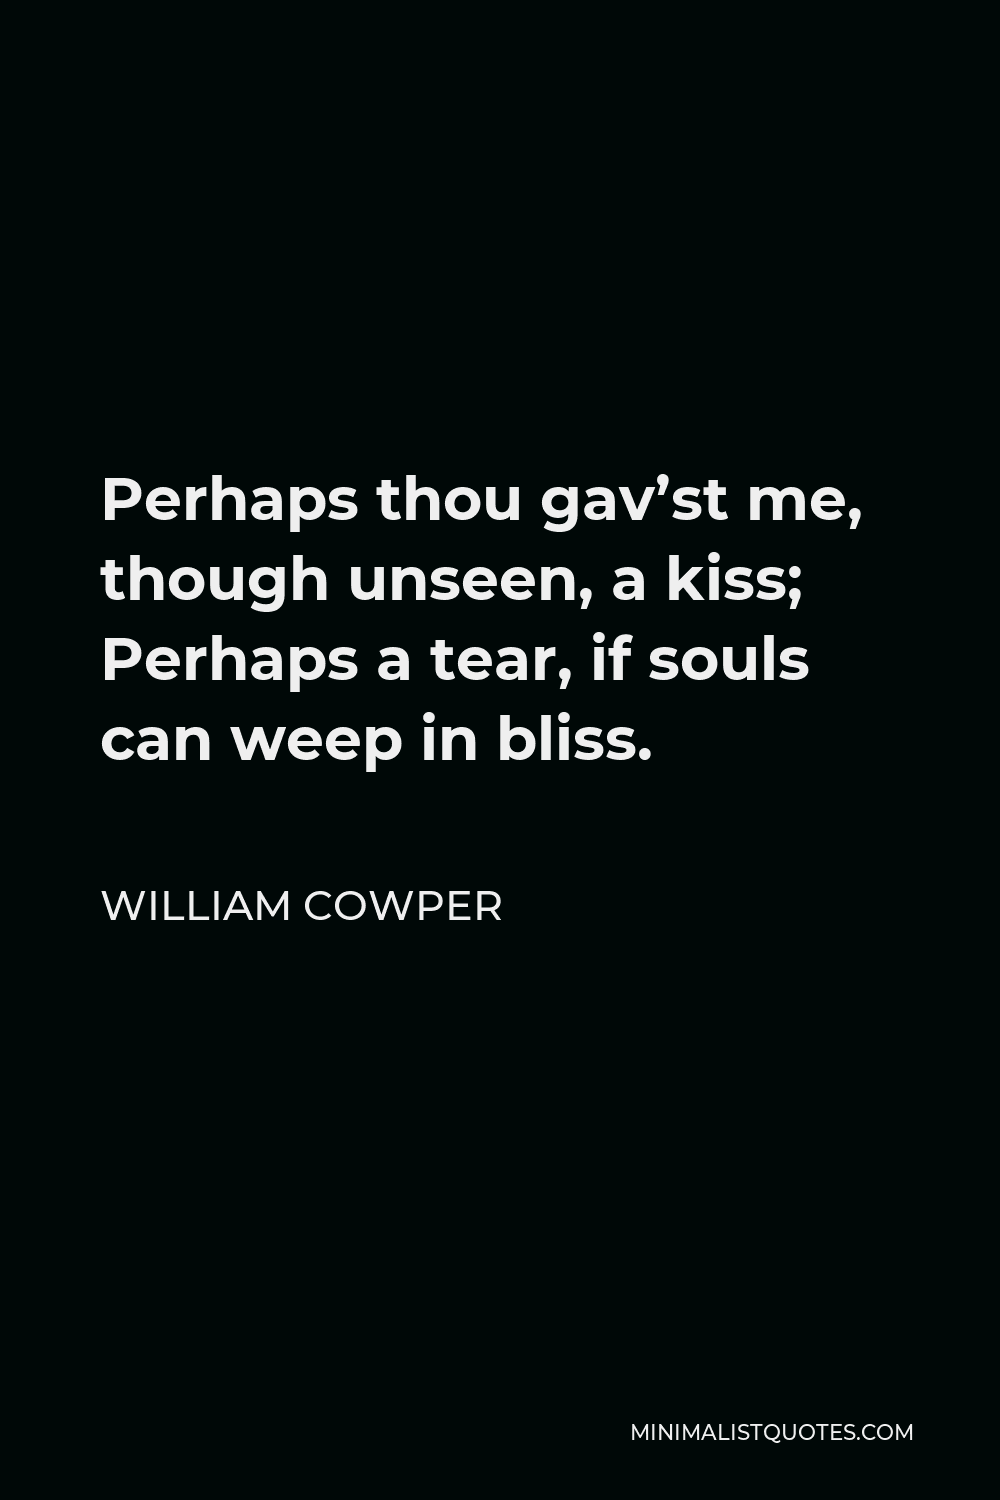 William Cowper Quote - Perhaps thou gav’st me, though unseen, a kiss; Perhaps a tear, if souls can weep in bliss.